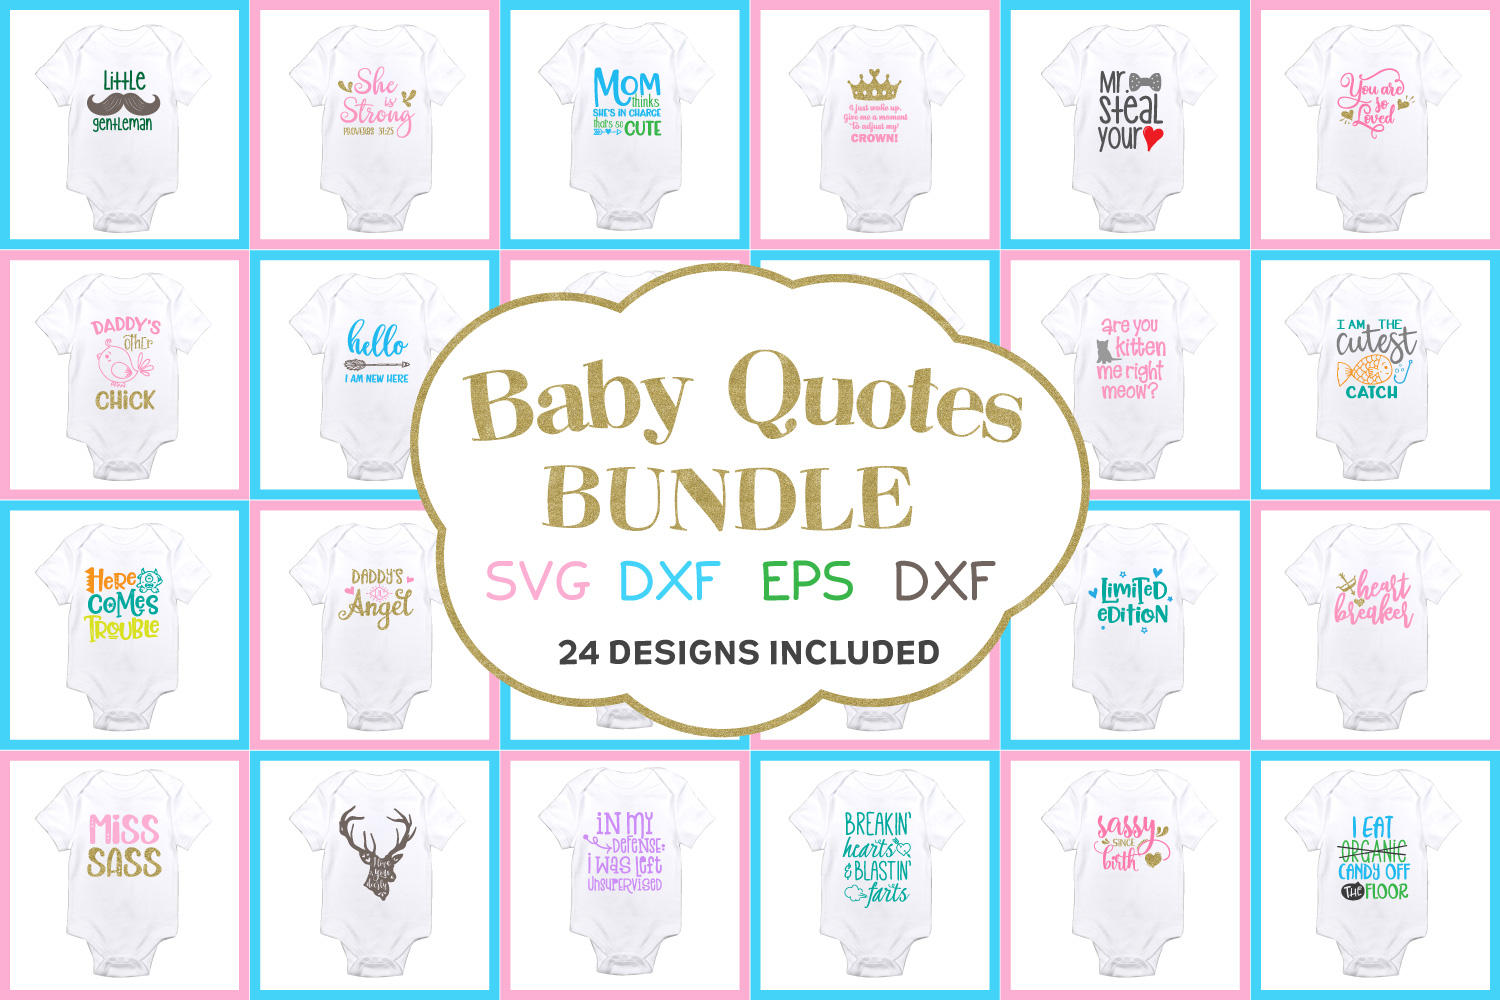 Baby Quotes Bundle SVG, EPS, DXF, PNG